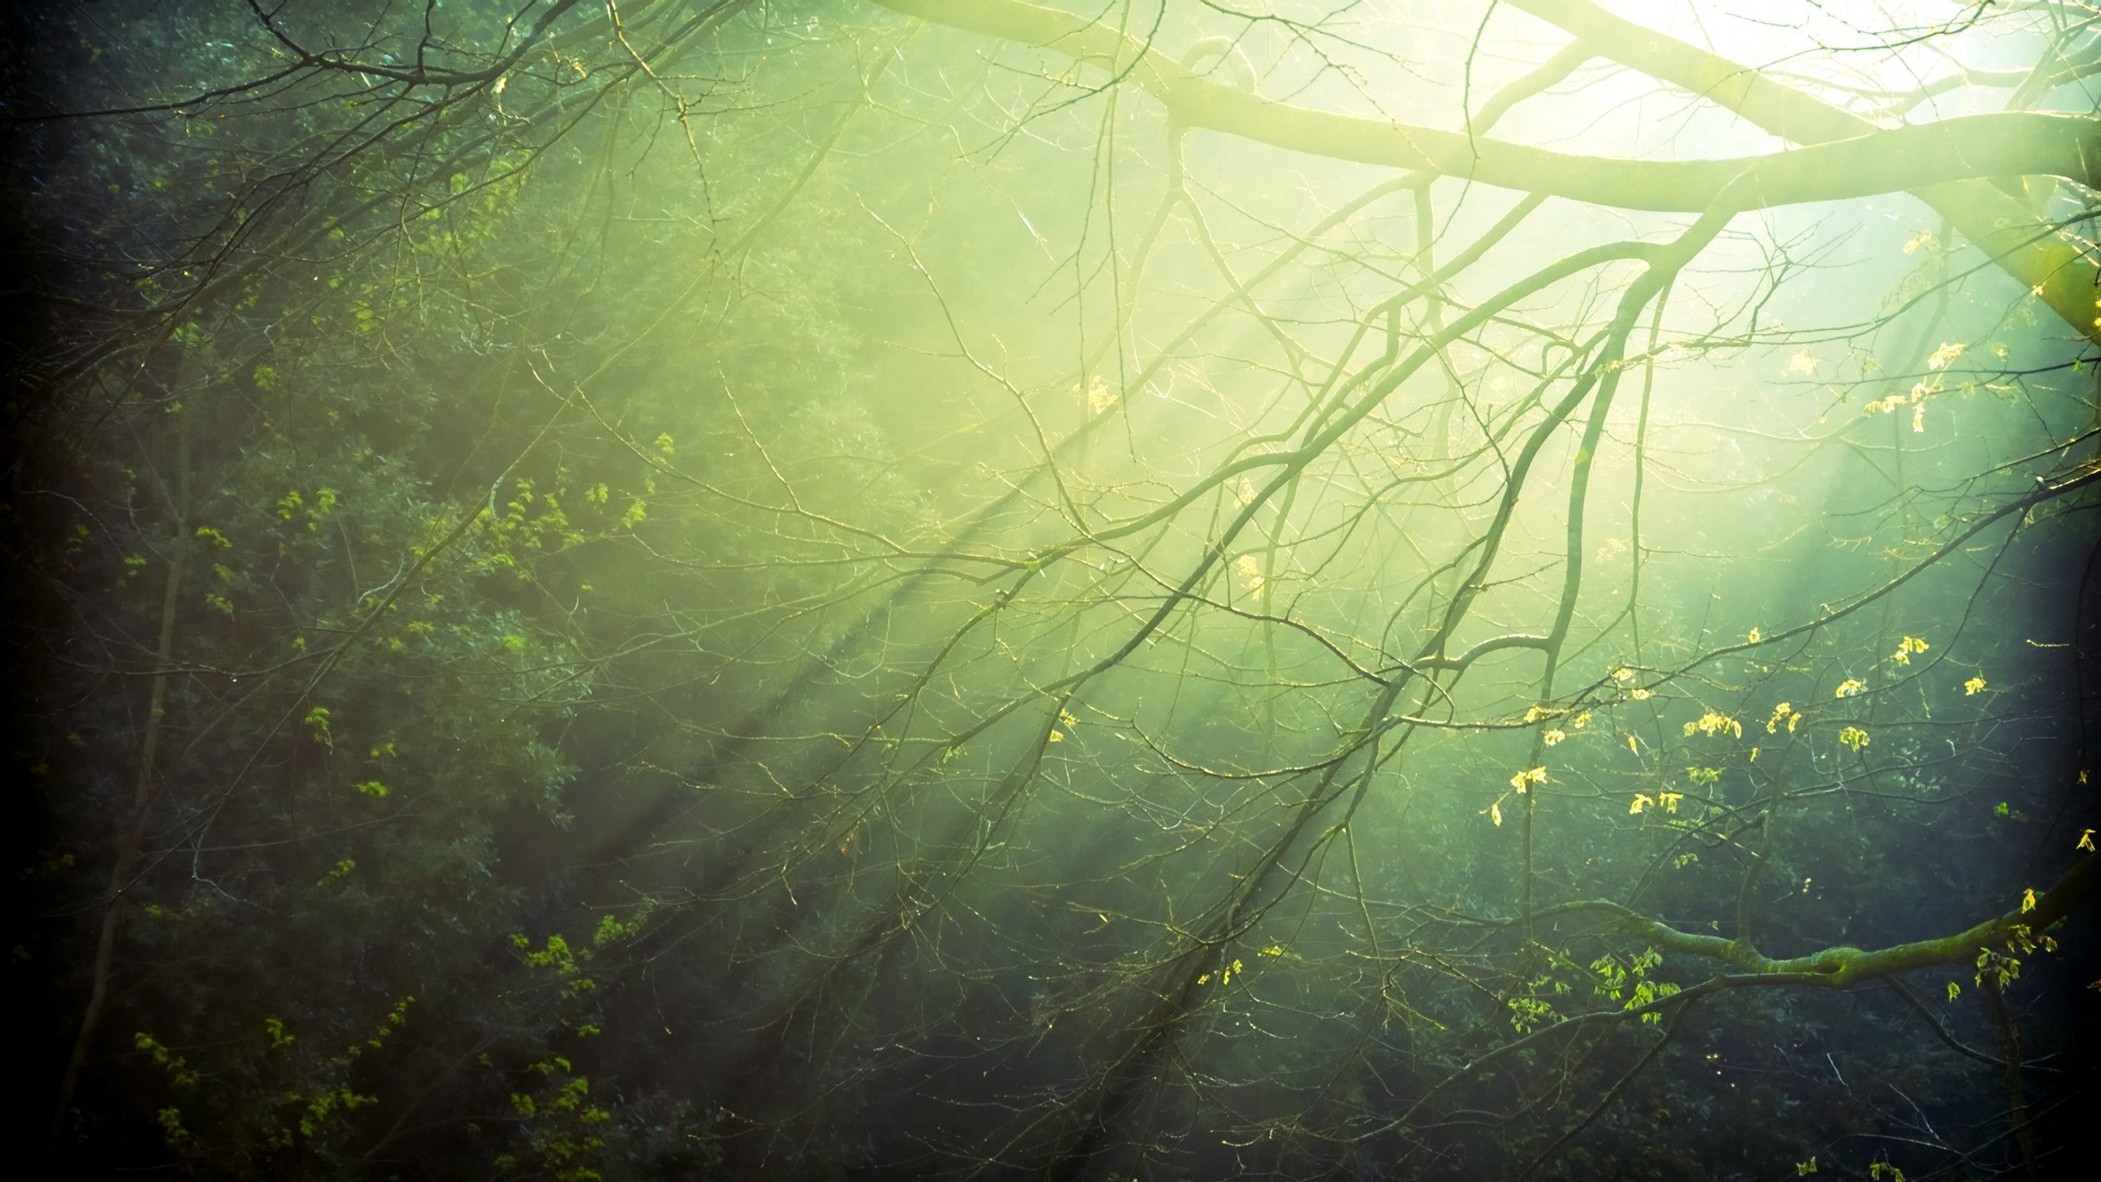 landscapes, nature, trees, forests, shadows, sunlight, branches - desktop wallpaper